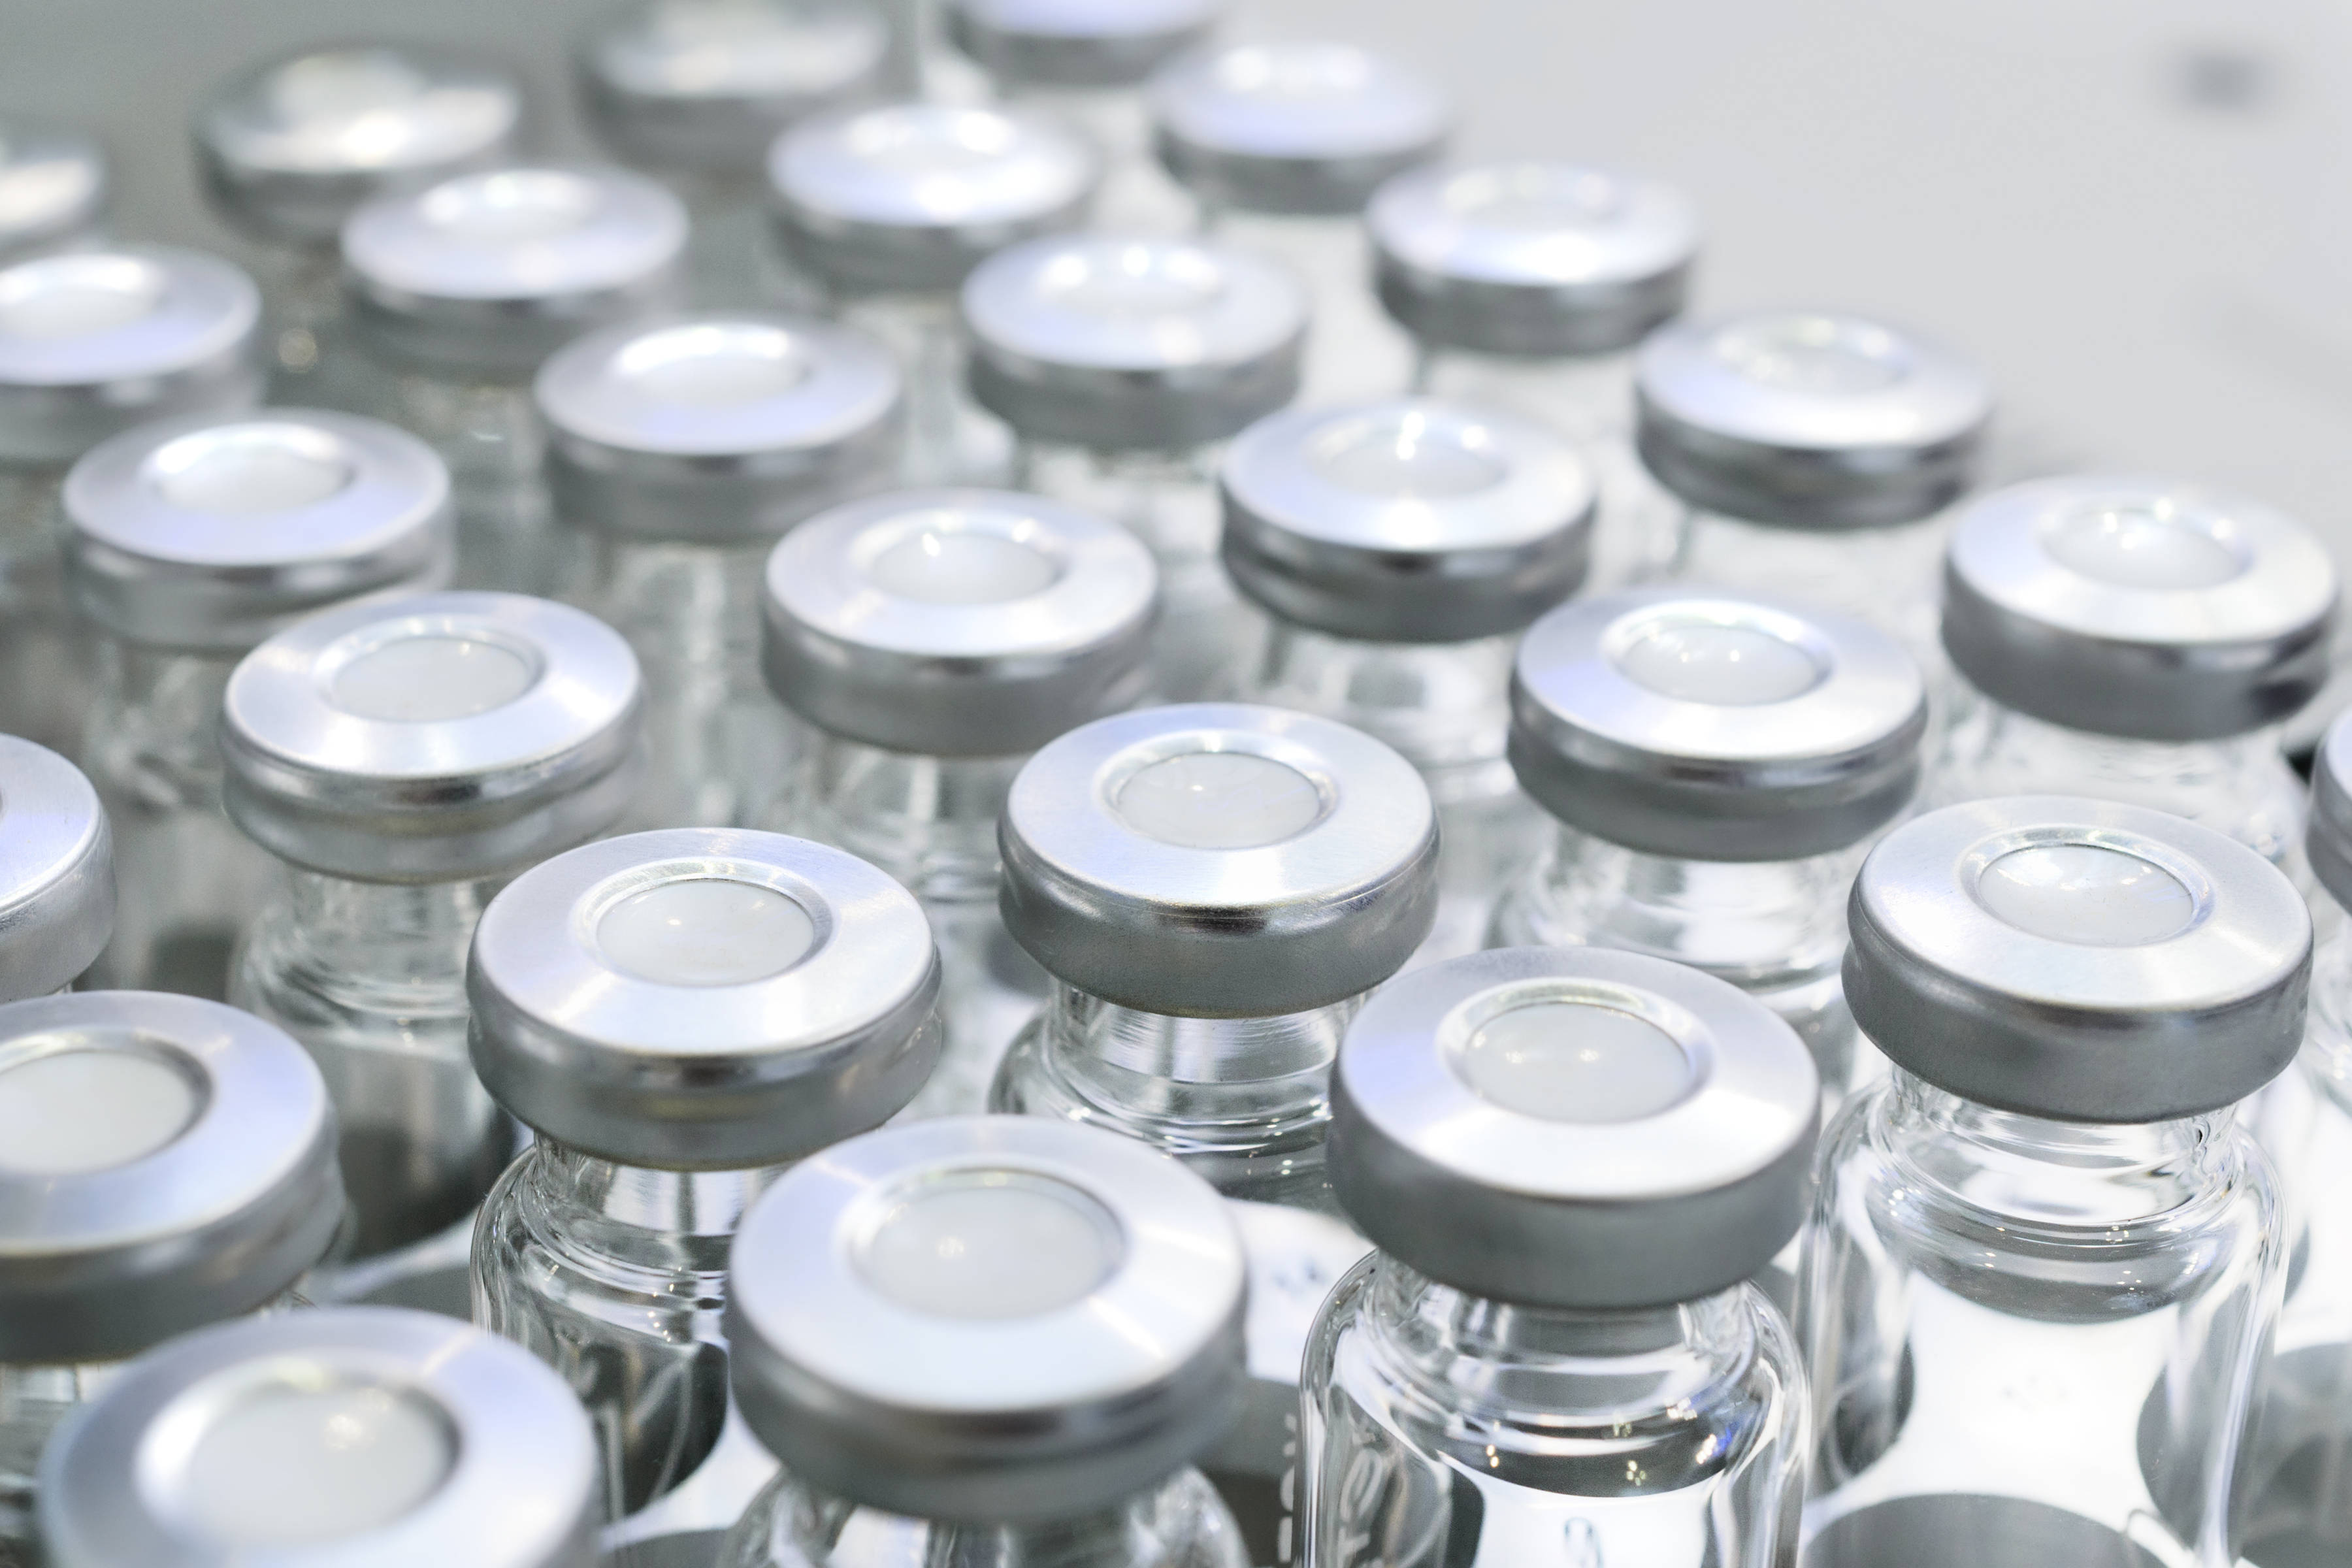 Glass vials for liquid samples. Laboratory equipment for dispensing fluid samples. Shallow depth of field. Photo: Nordroden / iStock.